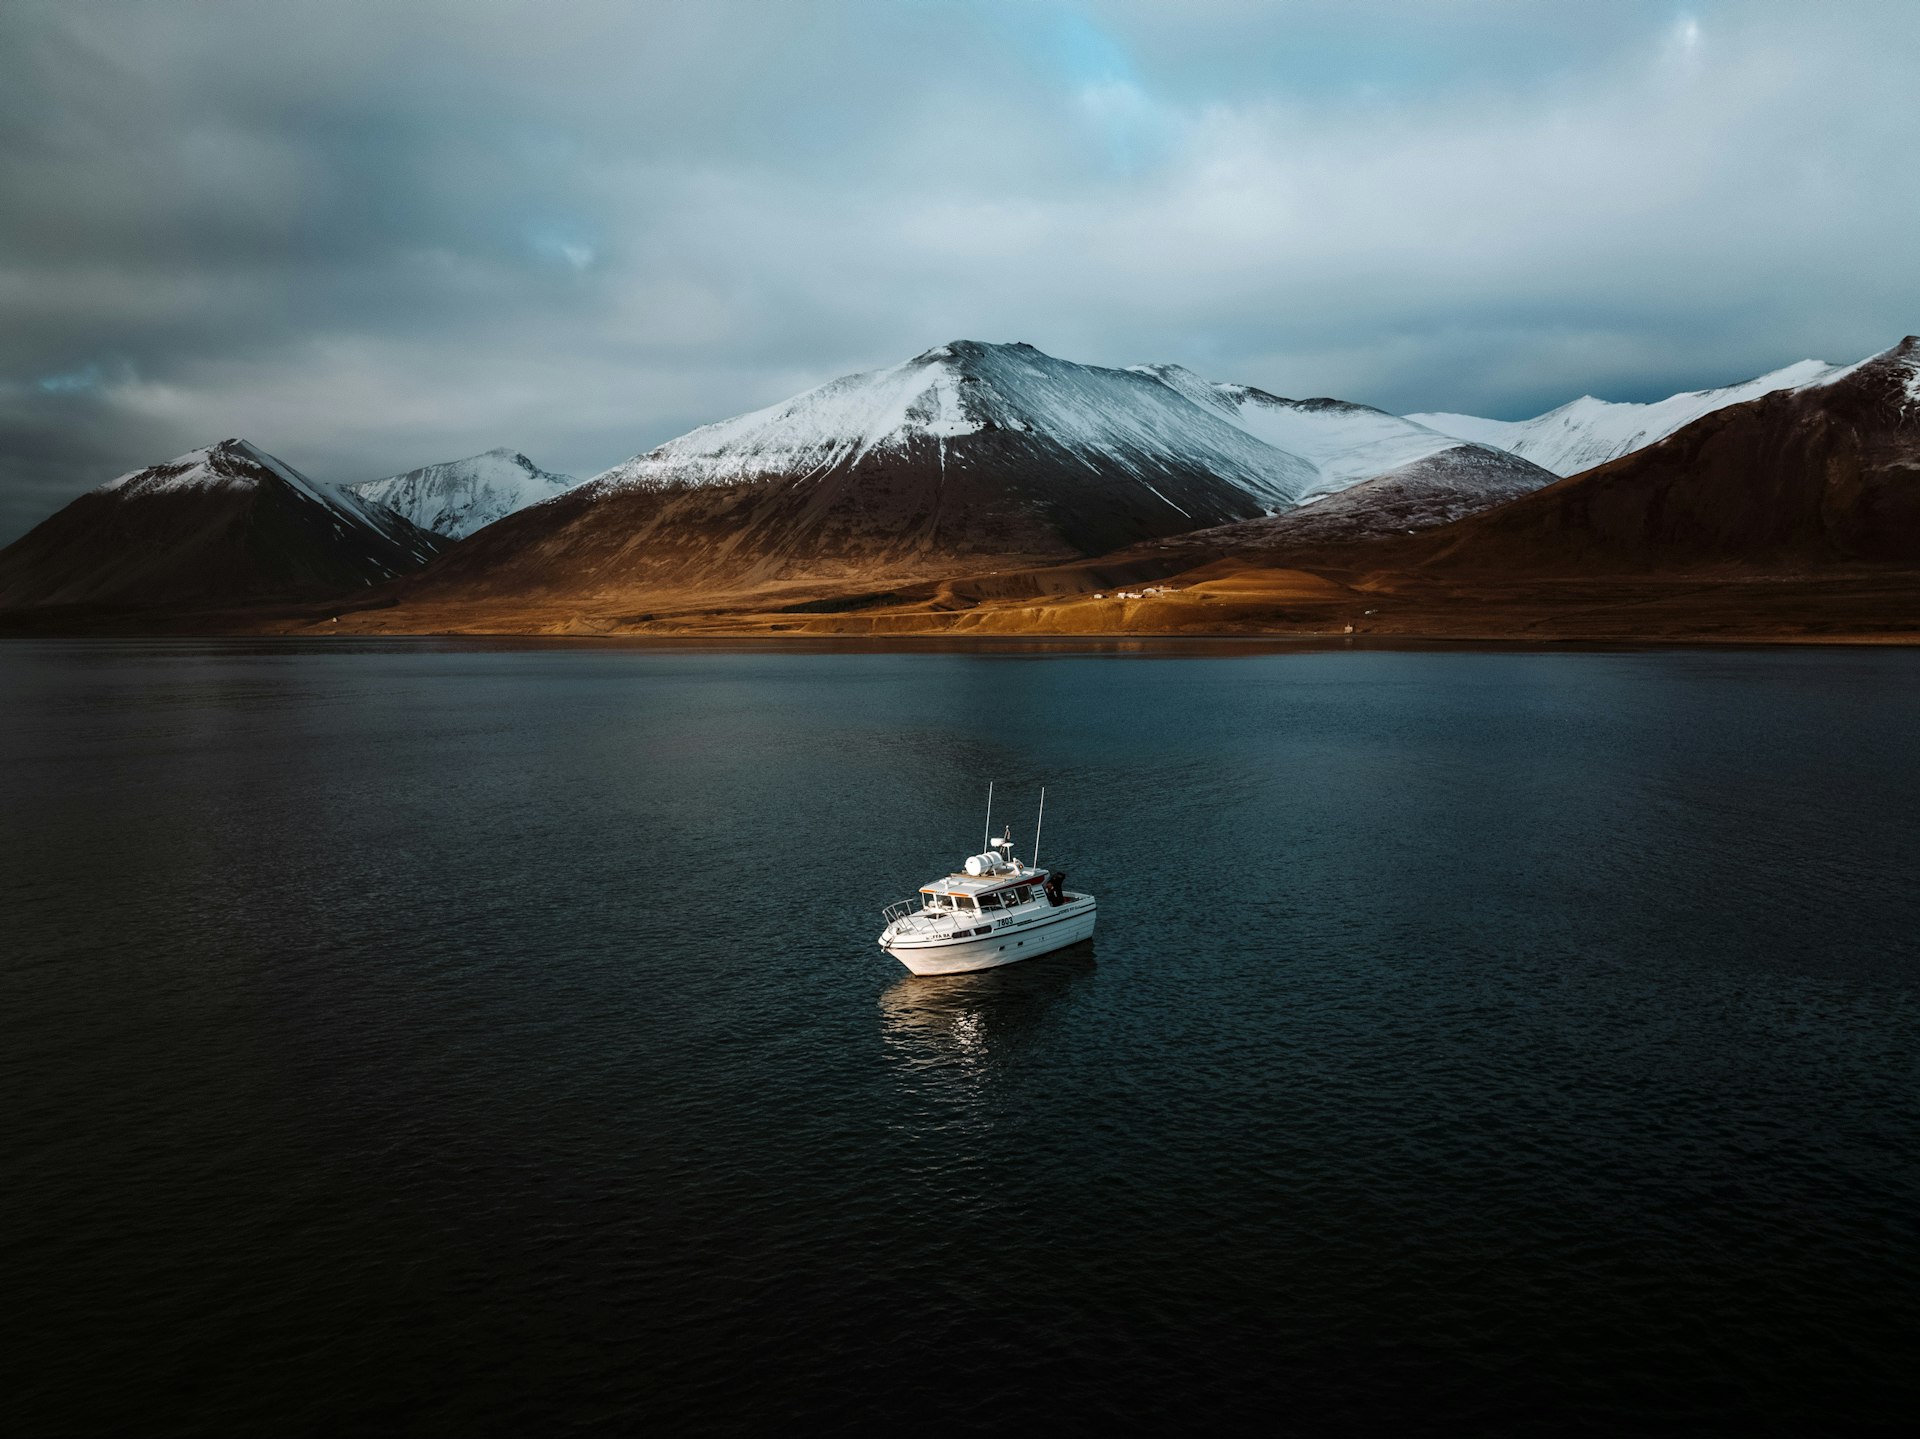 A boat sits in the fjord under a mountain